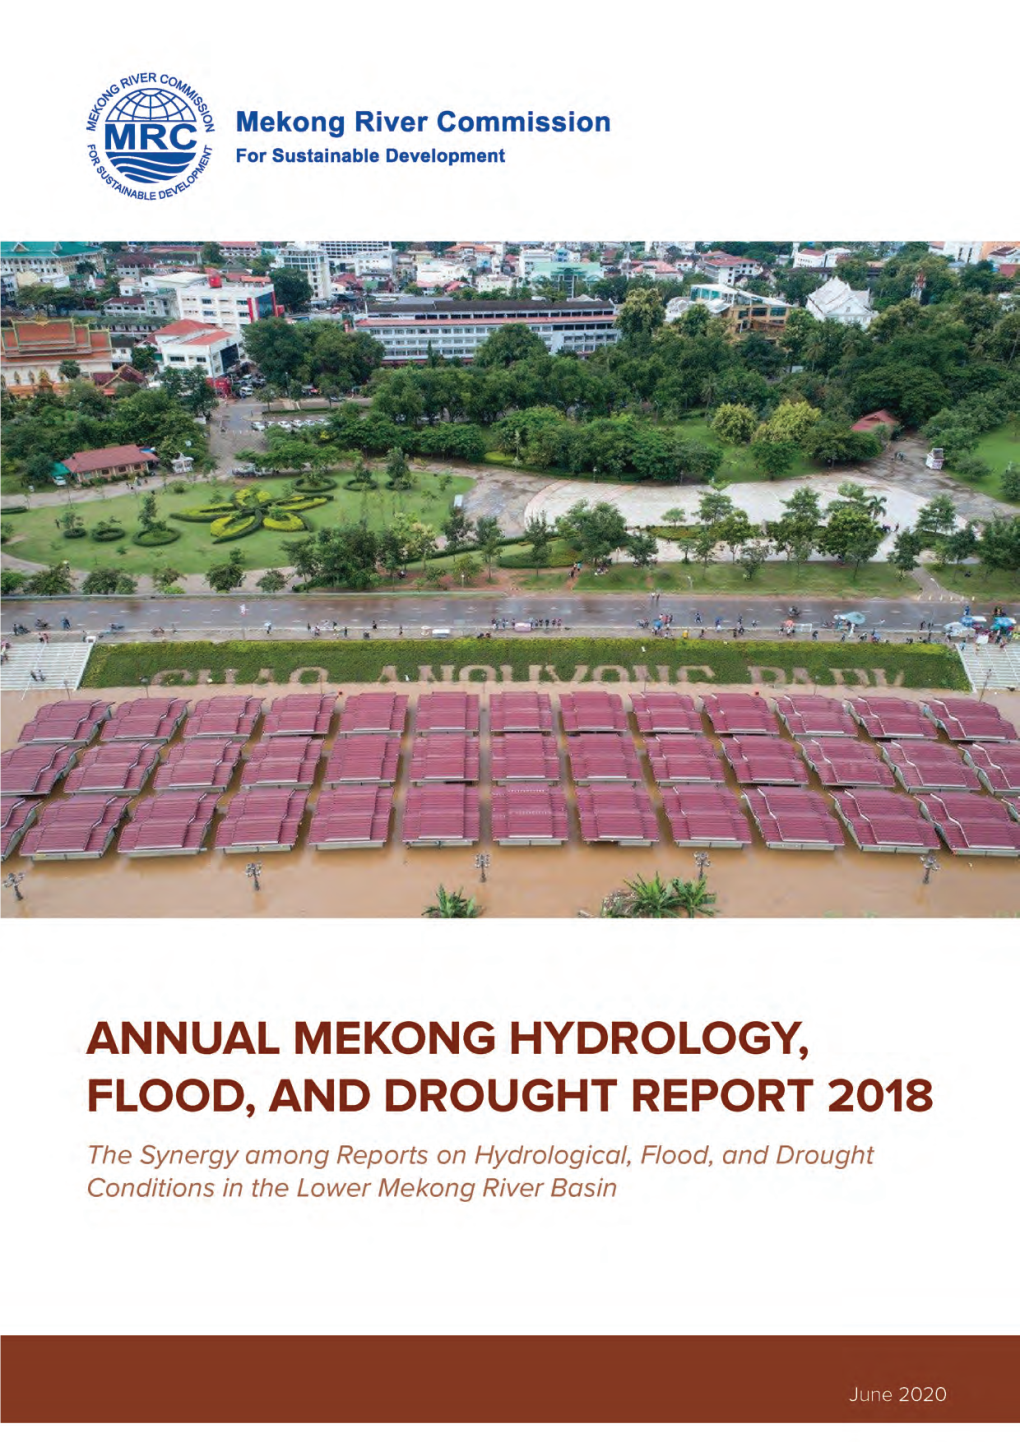 Annual Mekong Hydrology, Flood and Drought Report 2018: the Synergy Among Reports on Hydrological, Flood, and Drought Conditions in the Lower Mekong River Basin